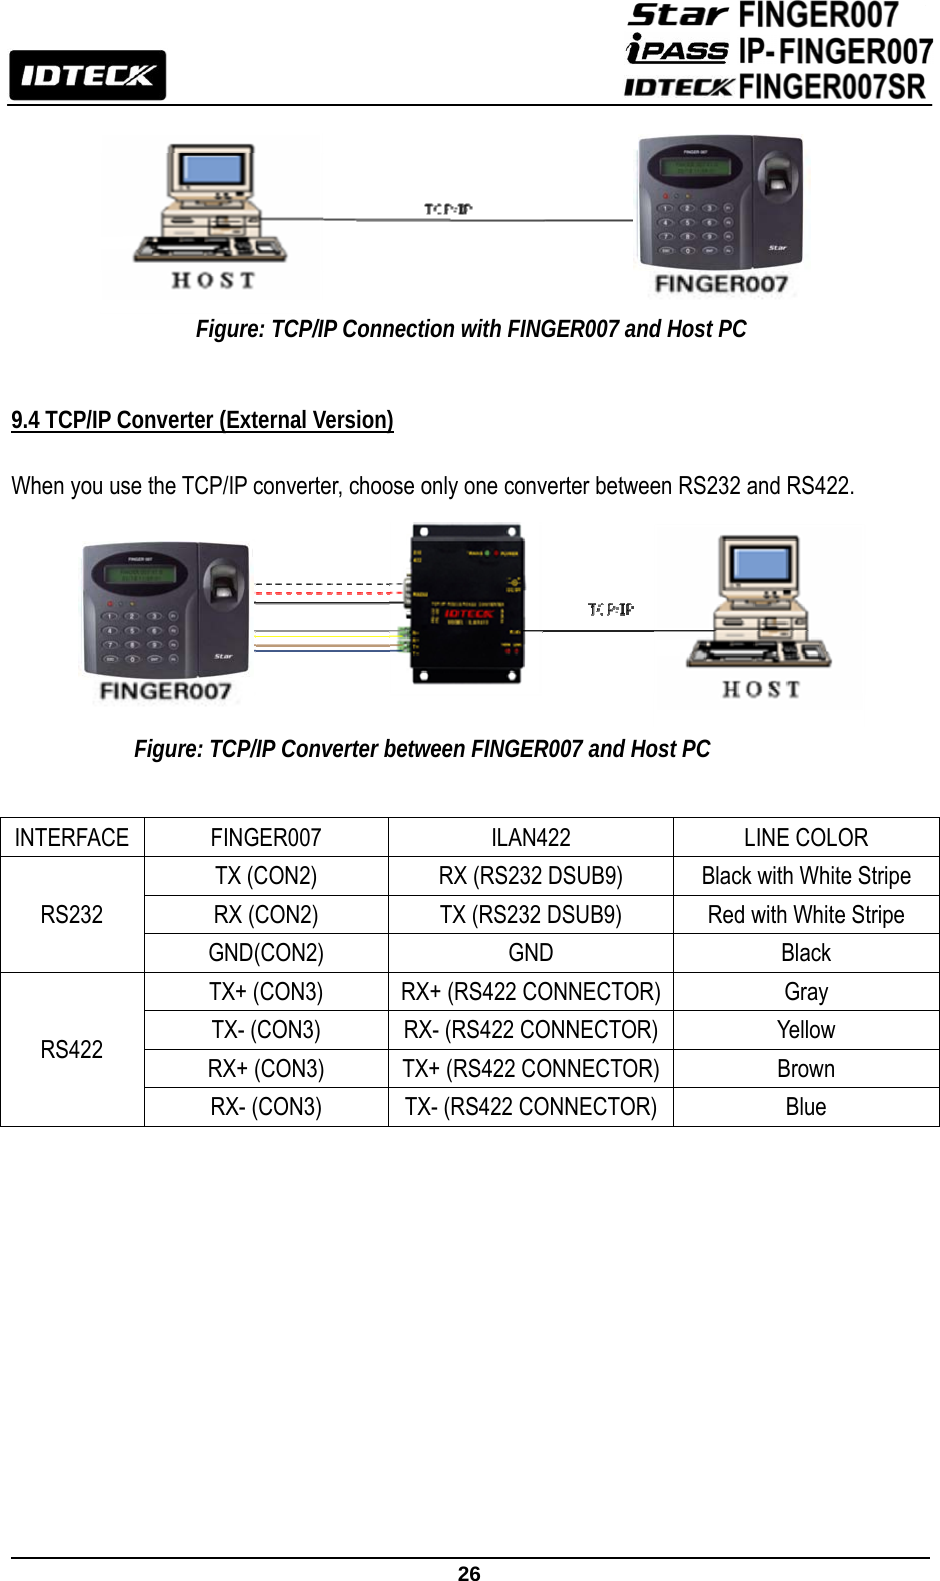                                                               26          Figure: TCP/IP Connection with FINGER007 and Host PC   9.4 TCP/IP Converter (External Version)  When you use the TCP/IP converter, choose only one converter between RS232 and RS422.         Figure: TCP/IP Converter between FINGER007 and Host PC                 INTERFACE FINGER007  ILAN422  LINE COLOR RS232 TX (CON2)  RX (RS232 DSUB9)  Black with White Stripe RX (CON2)  TX (RS232 DSUB9)  Red with White Stripe GND(CON2) GND  Black RS422 TX+ (CON3)  RX+ (RS422 CONNECTOR) Gray TX- (CON3)  RX- (RS422 CONNECTOR) Yellow RX+ (CON3)  TX+ (RS422 CONNECTOR) Brown RX- (CON3)  TX- (RS422 CONNECTOR) Blue 